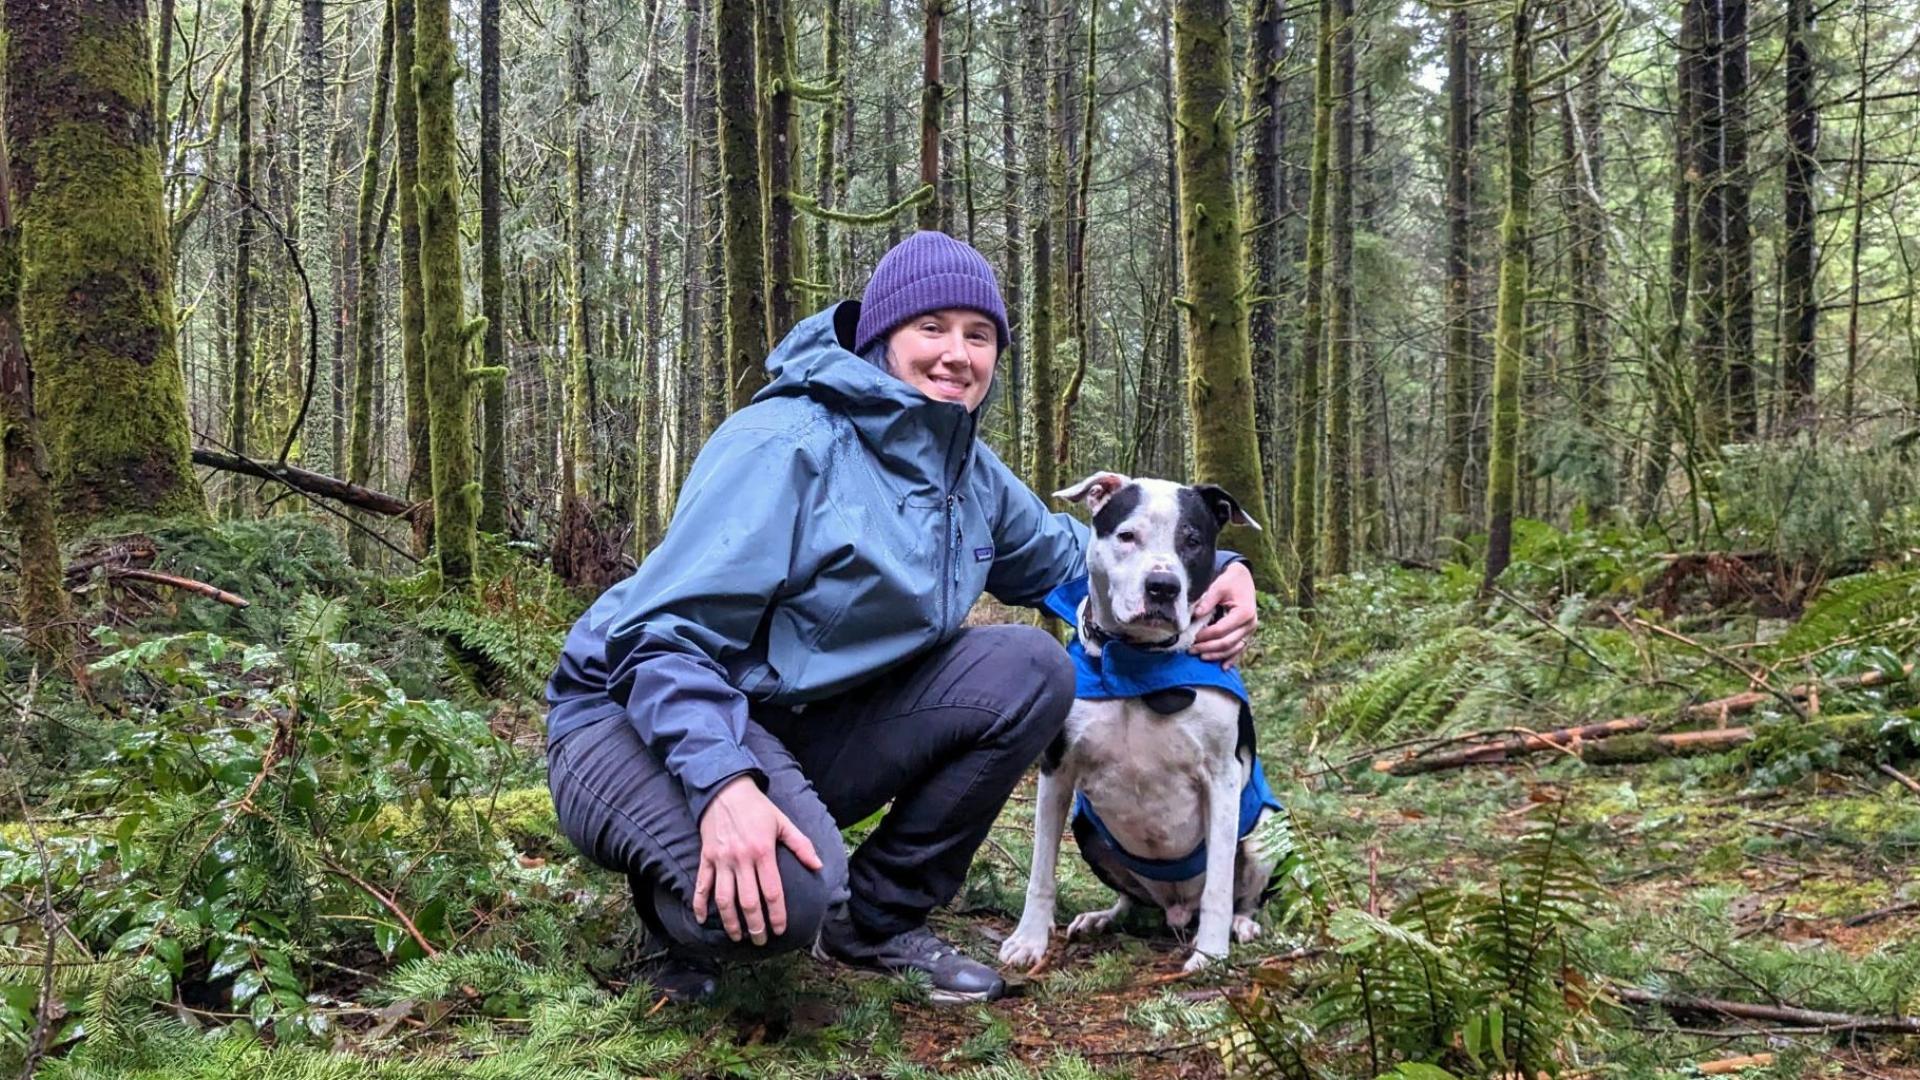 Project Drawdown scientist in a green raincoat crouches with her arm around a dog in a blue raincoat among ferns and moss-covered trees.